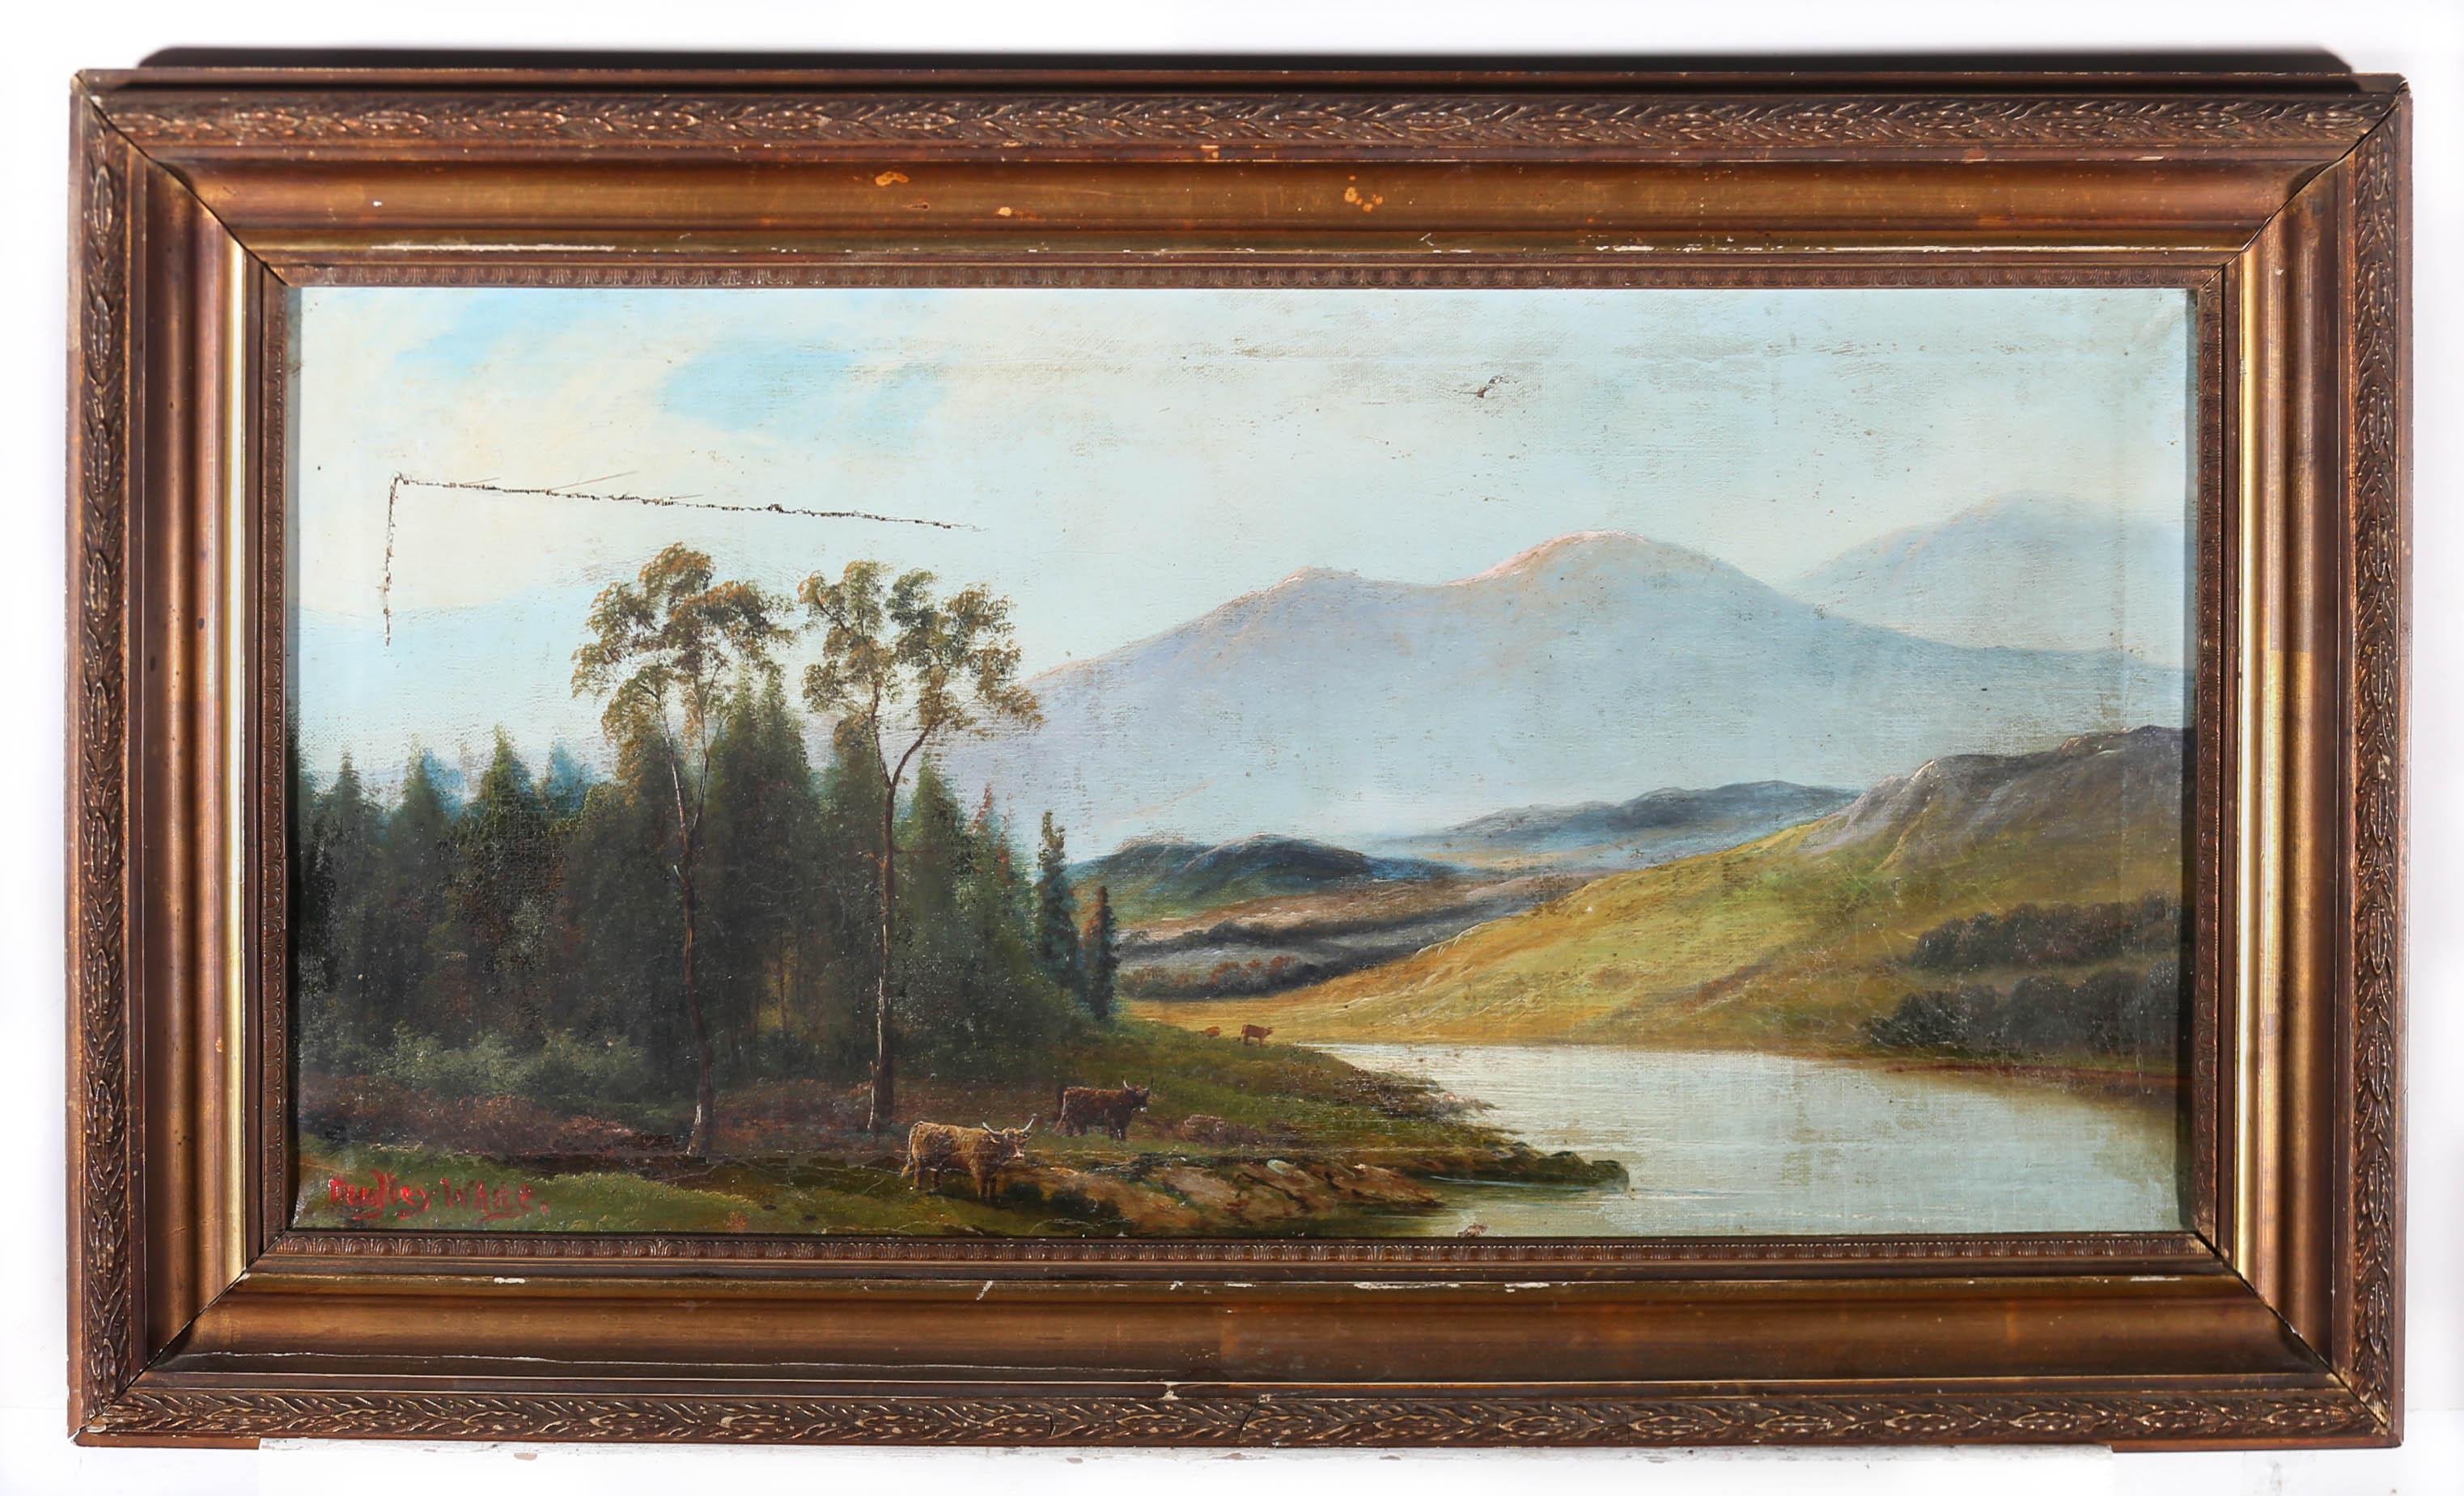 Dudley White - For Restoration 19th Century Oil, Cows in a Highland Landscape 2